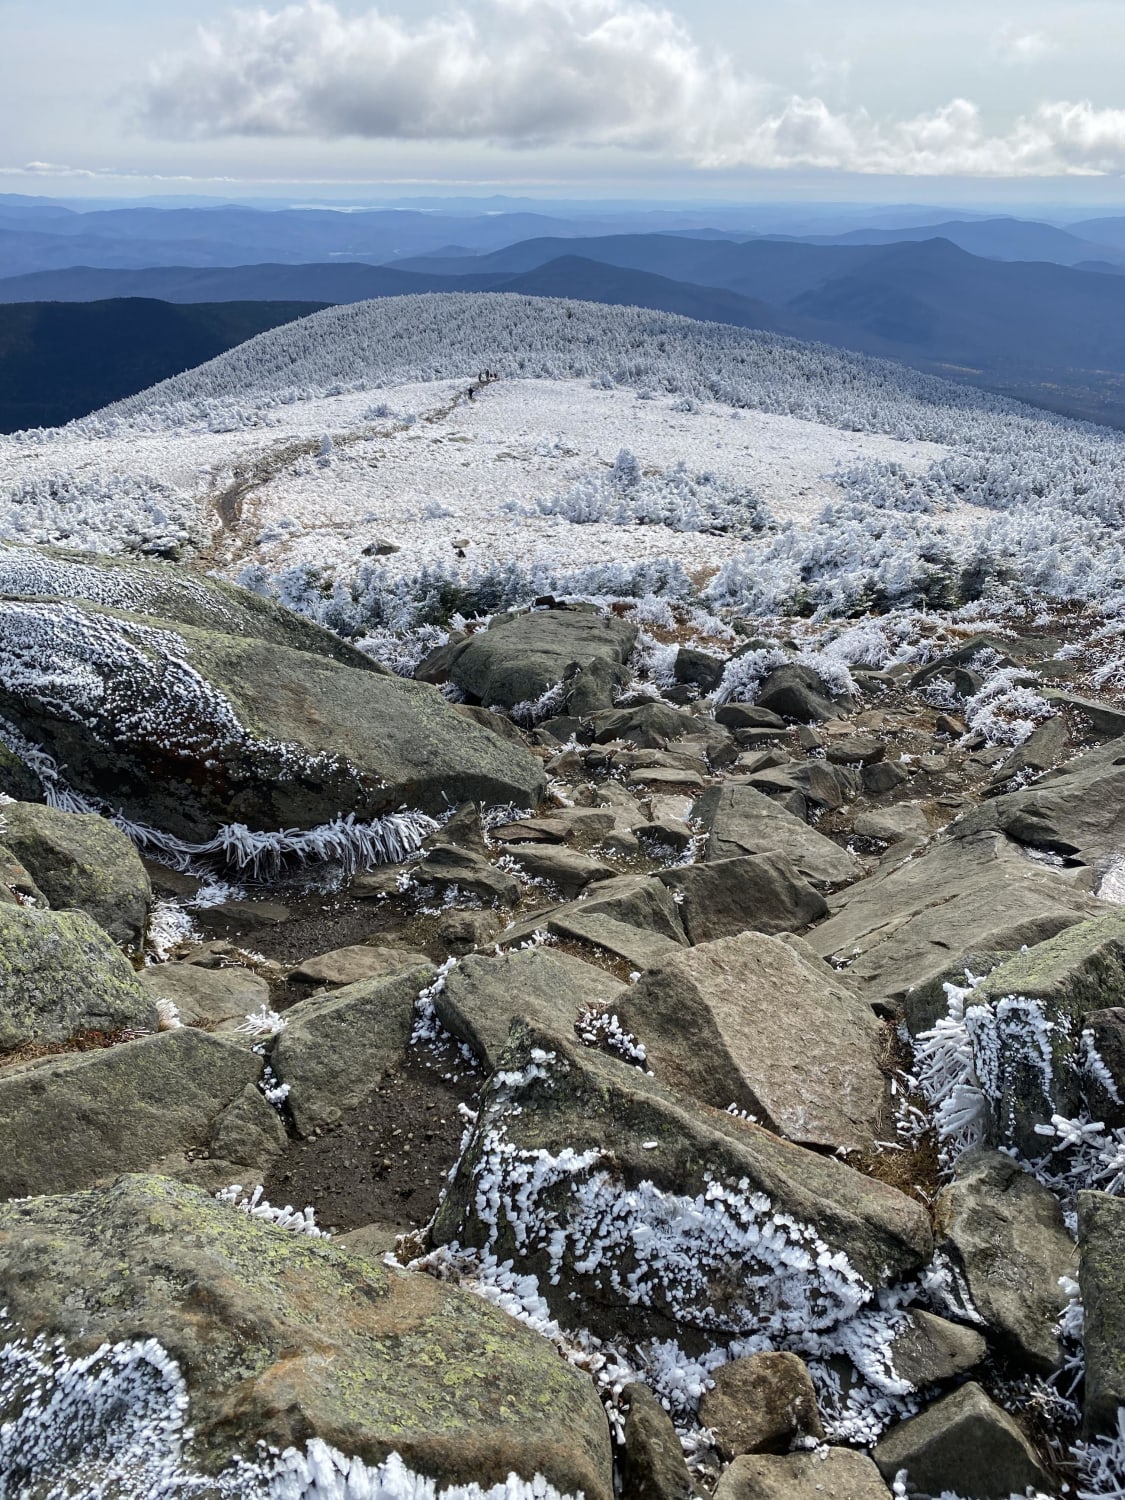 A rime ice wonderland this weekend on top of Mt Moosilauke, White Mountains, New Hampshire